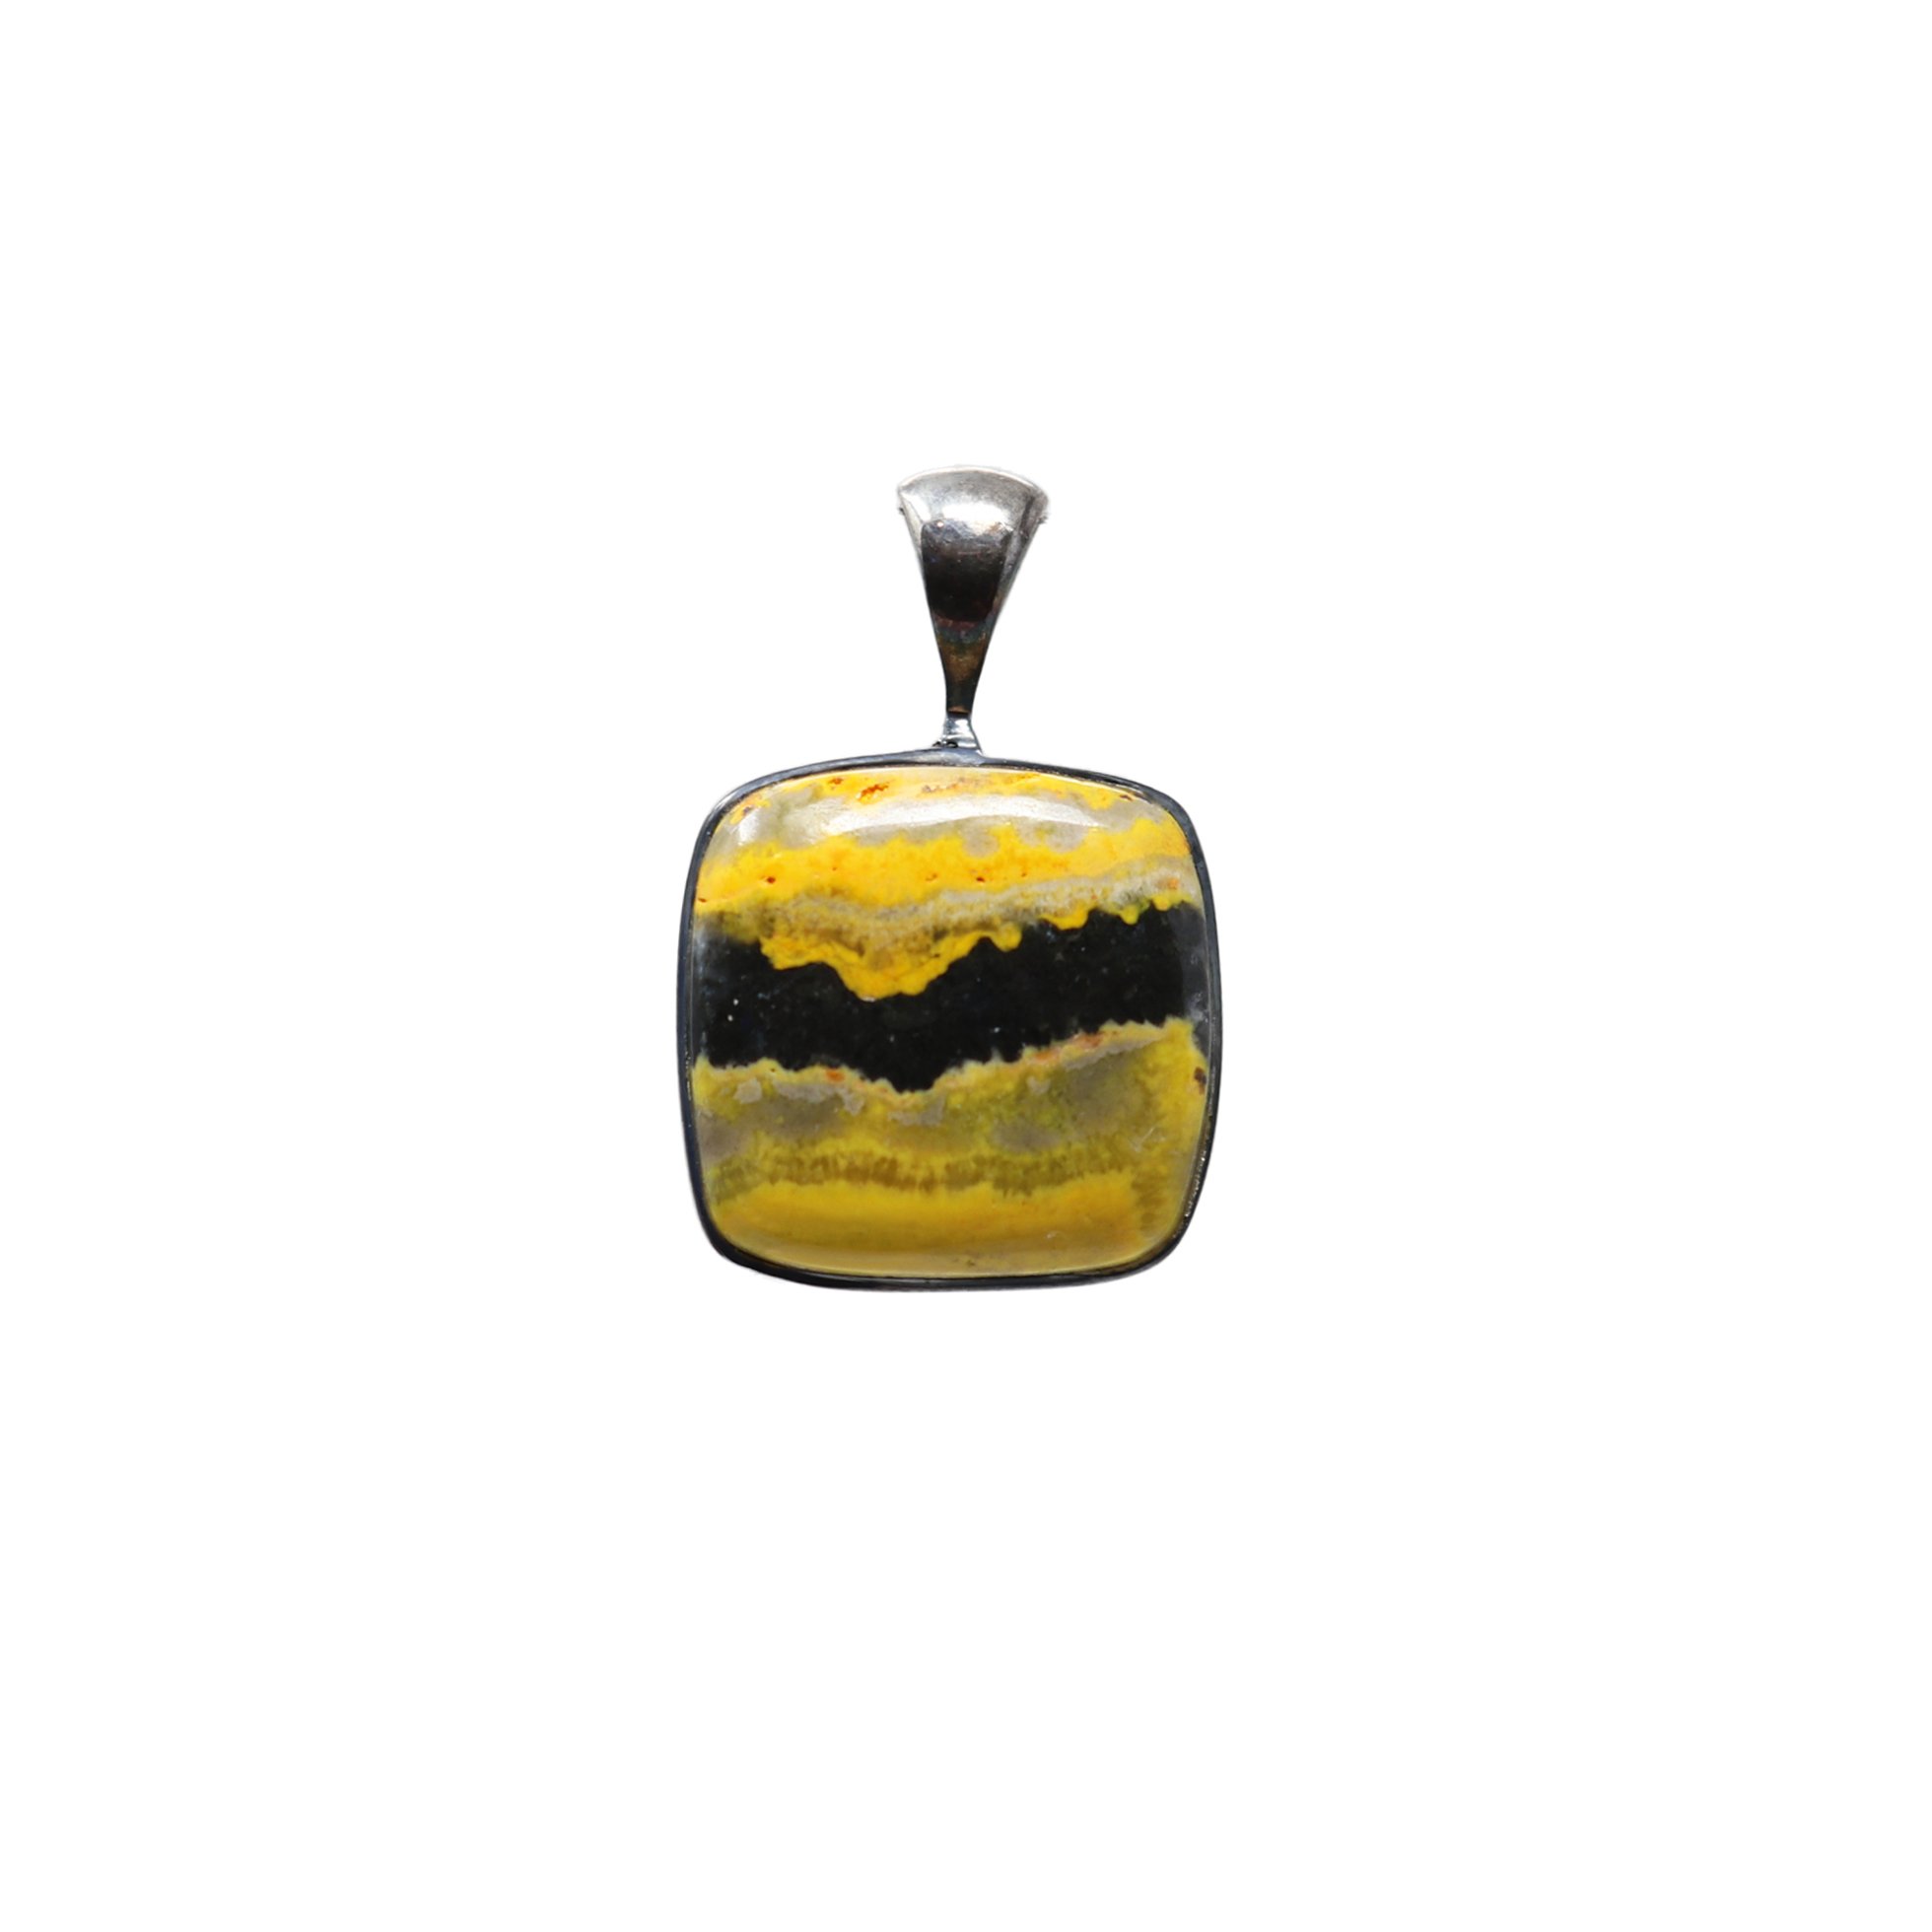 Bumblebee Jasper Pendant - Square Cabochon with Rounded Edges & 925 Sterling Silver Bezel - Deep Ebony Vein